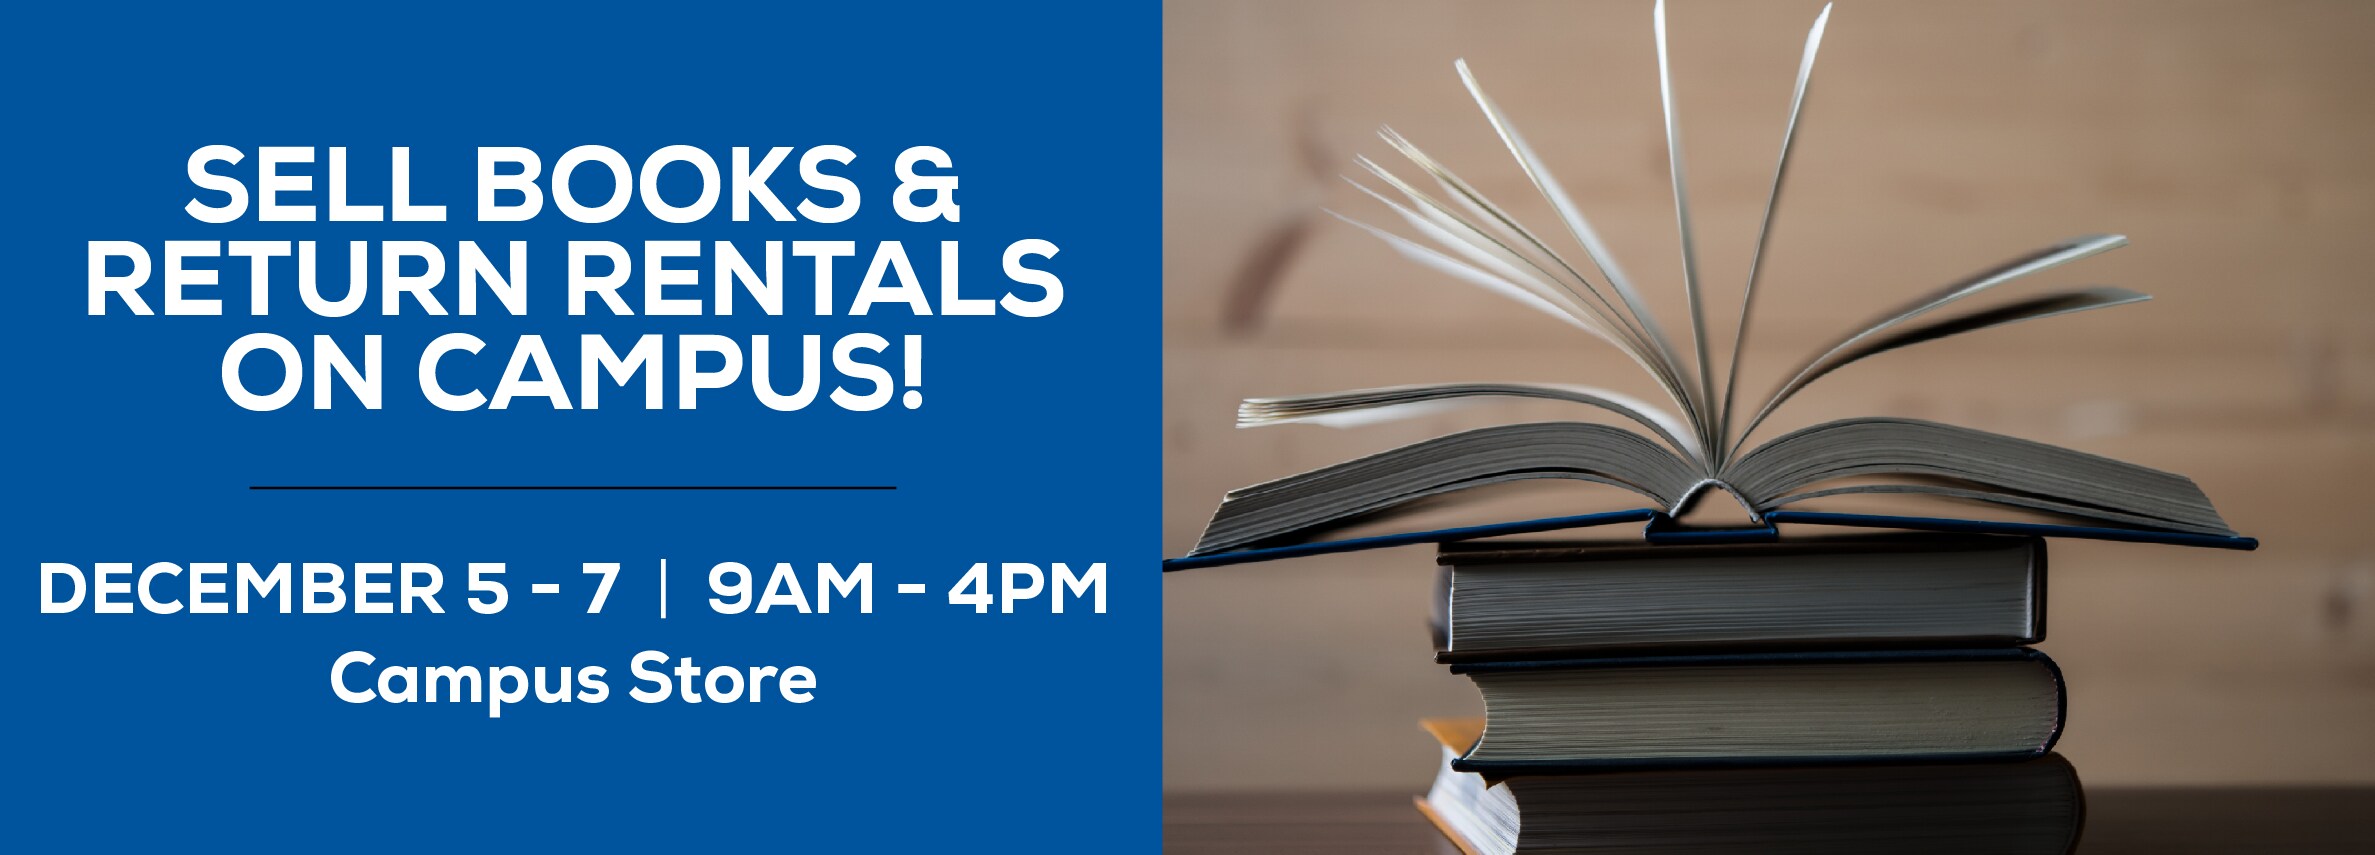 Sell Books & Return Rentals On Campus! December 5 - 7 from 9AM to 4PM. Located at Campus Store.